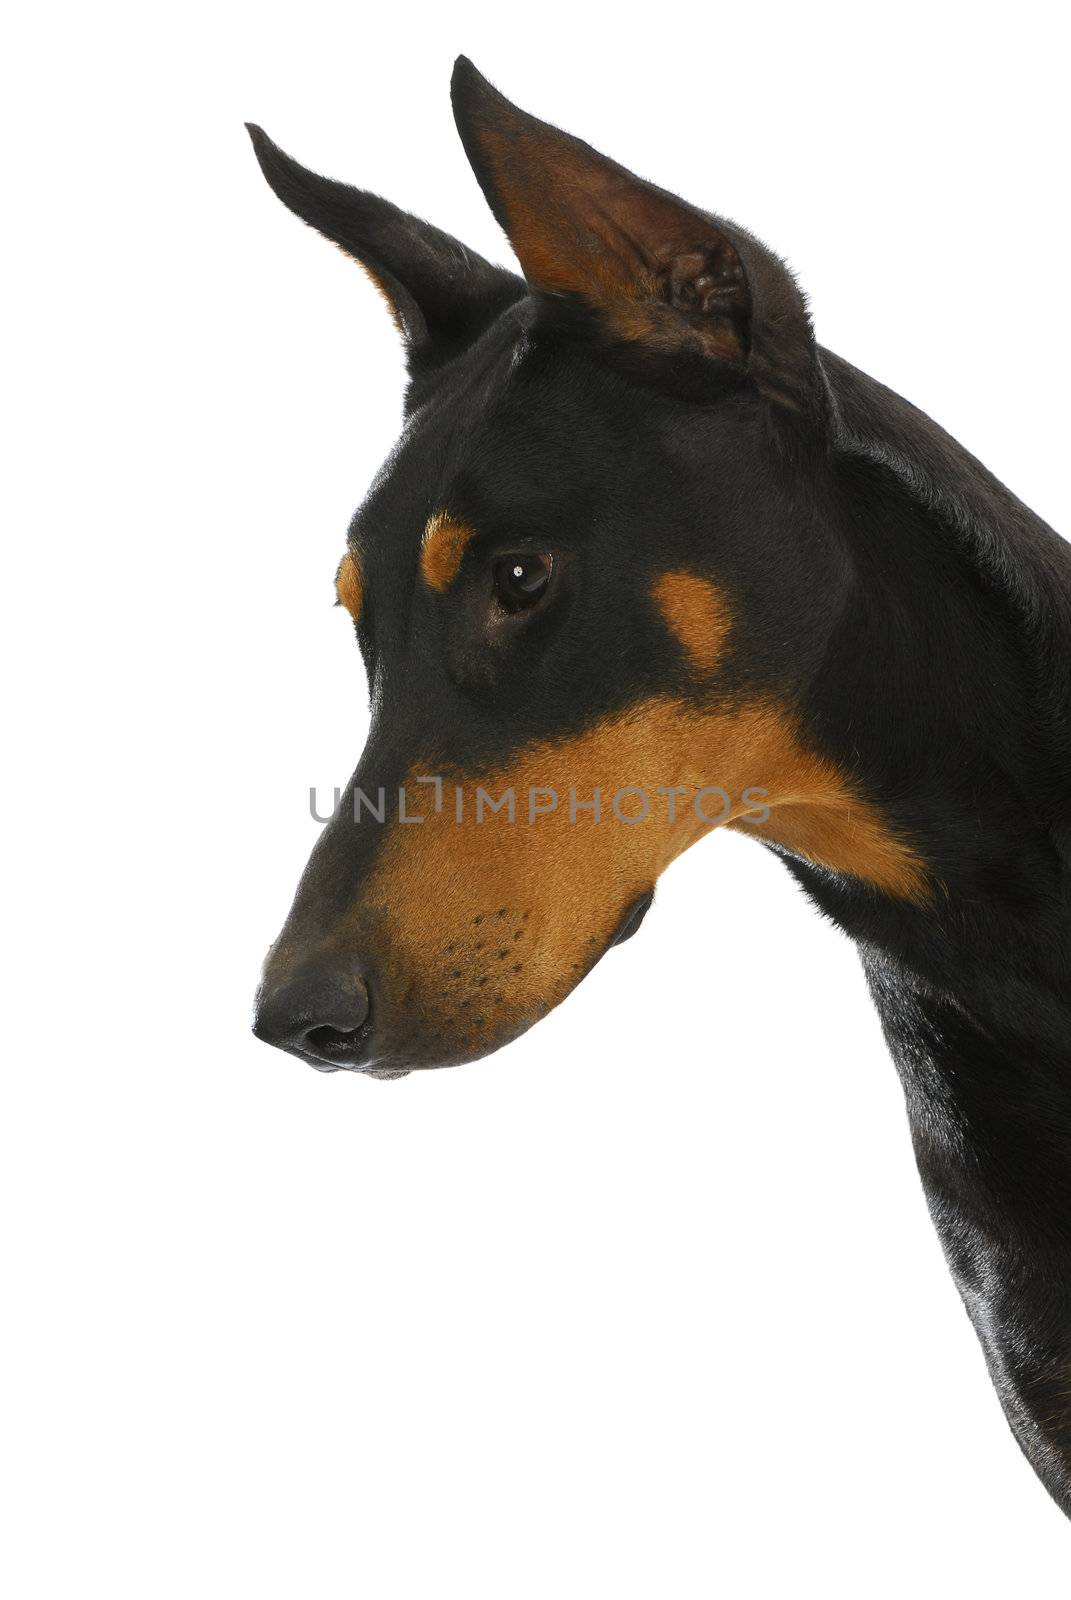 guard dog - doberman pinscher in protective stance isolated on white background